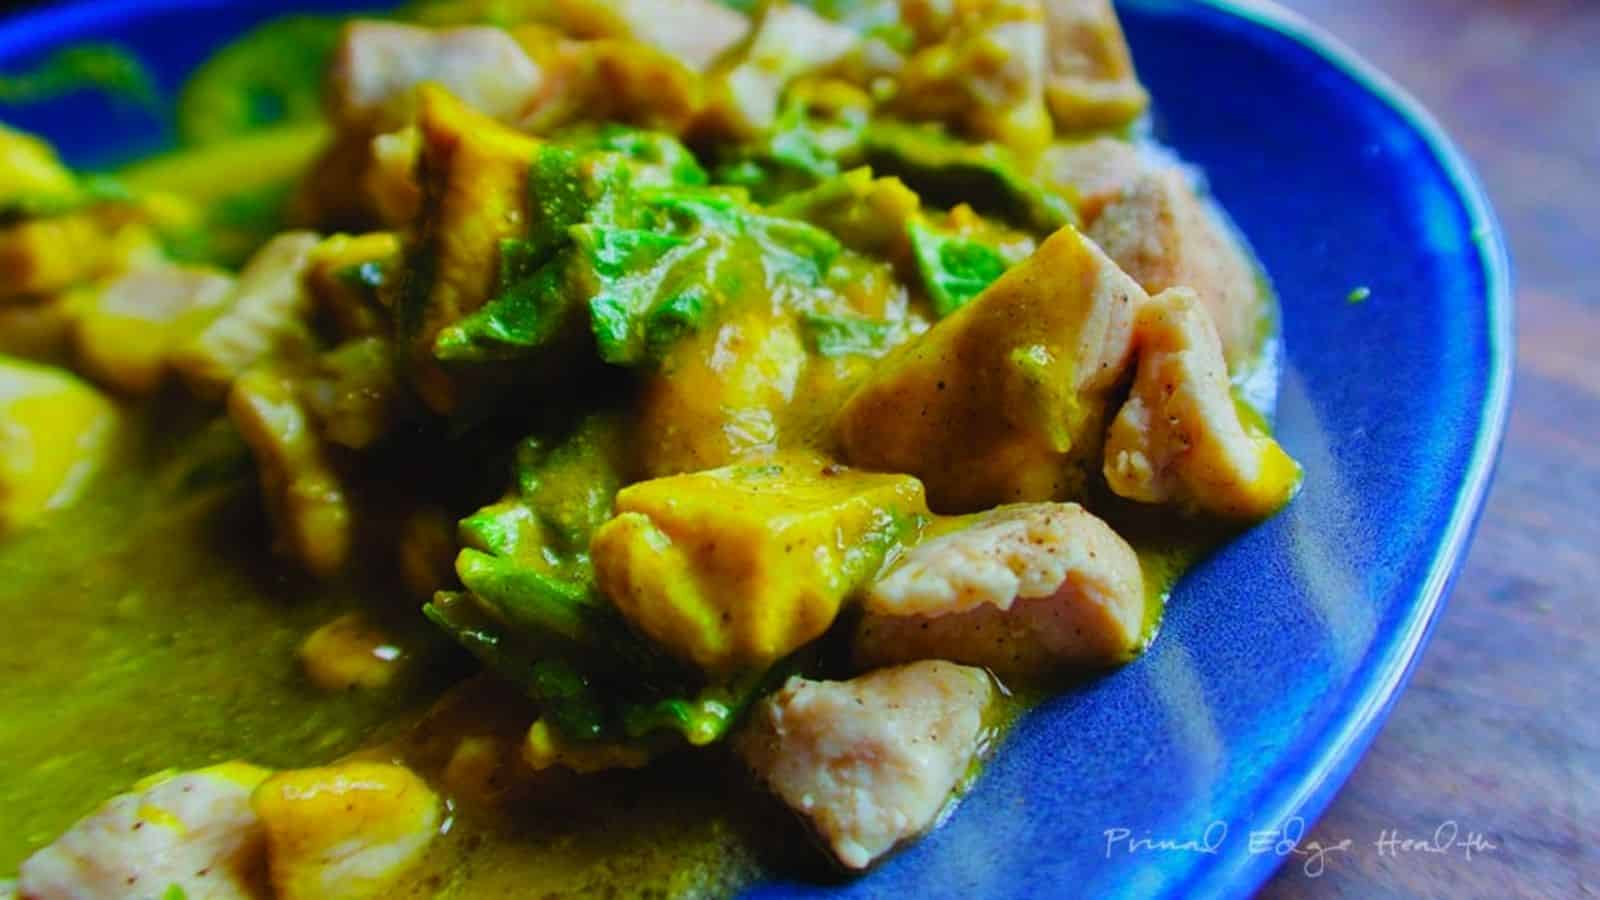 A blue plate with chicken and pumpkin in a curry sauce.